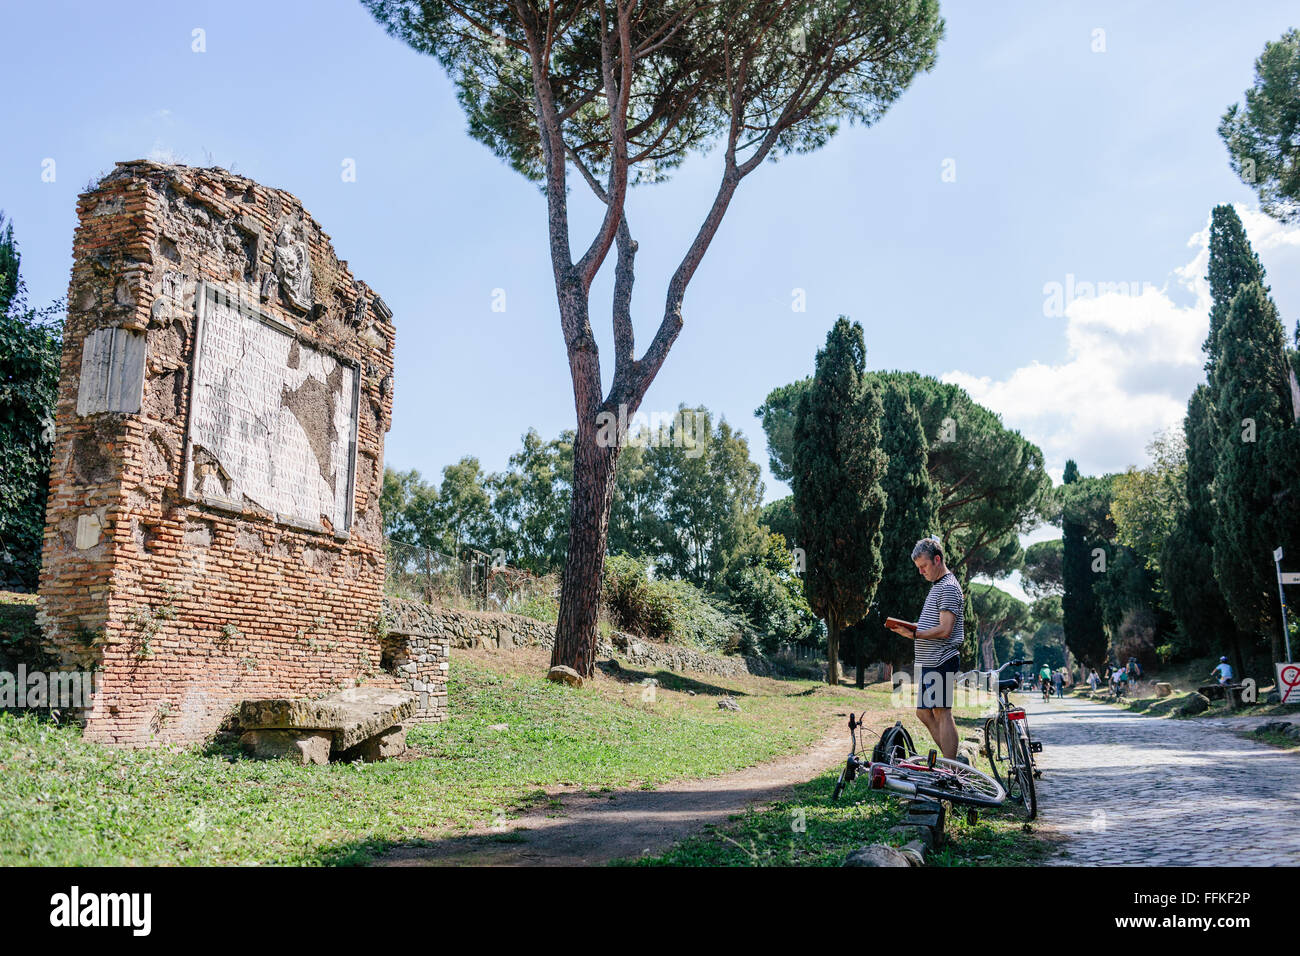 A male tourist with his bicycle stopping to admire a historical monument on the Via Appia / Appian Way in Rome, Italy. Stock Photo